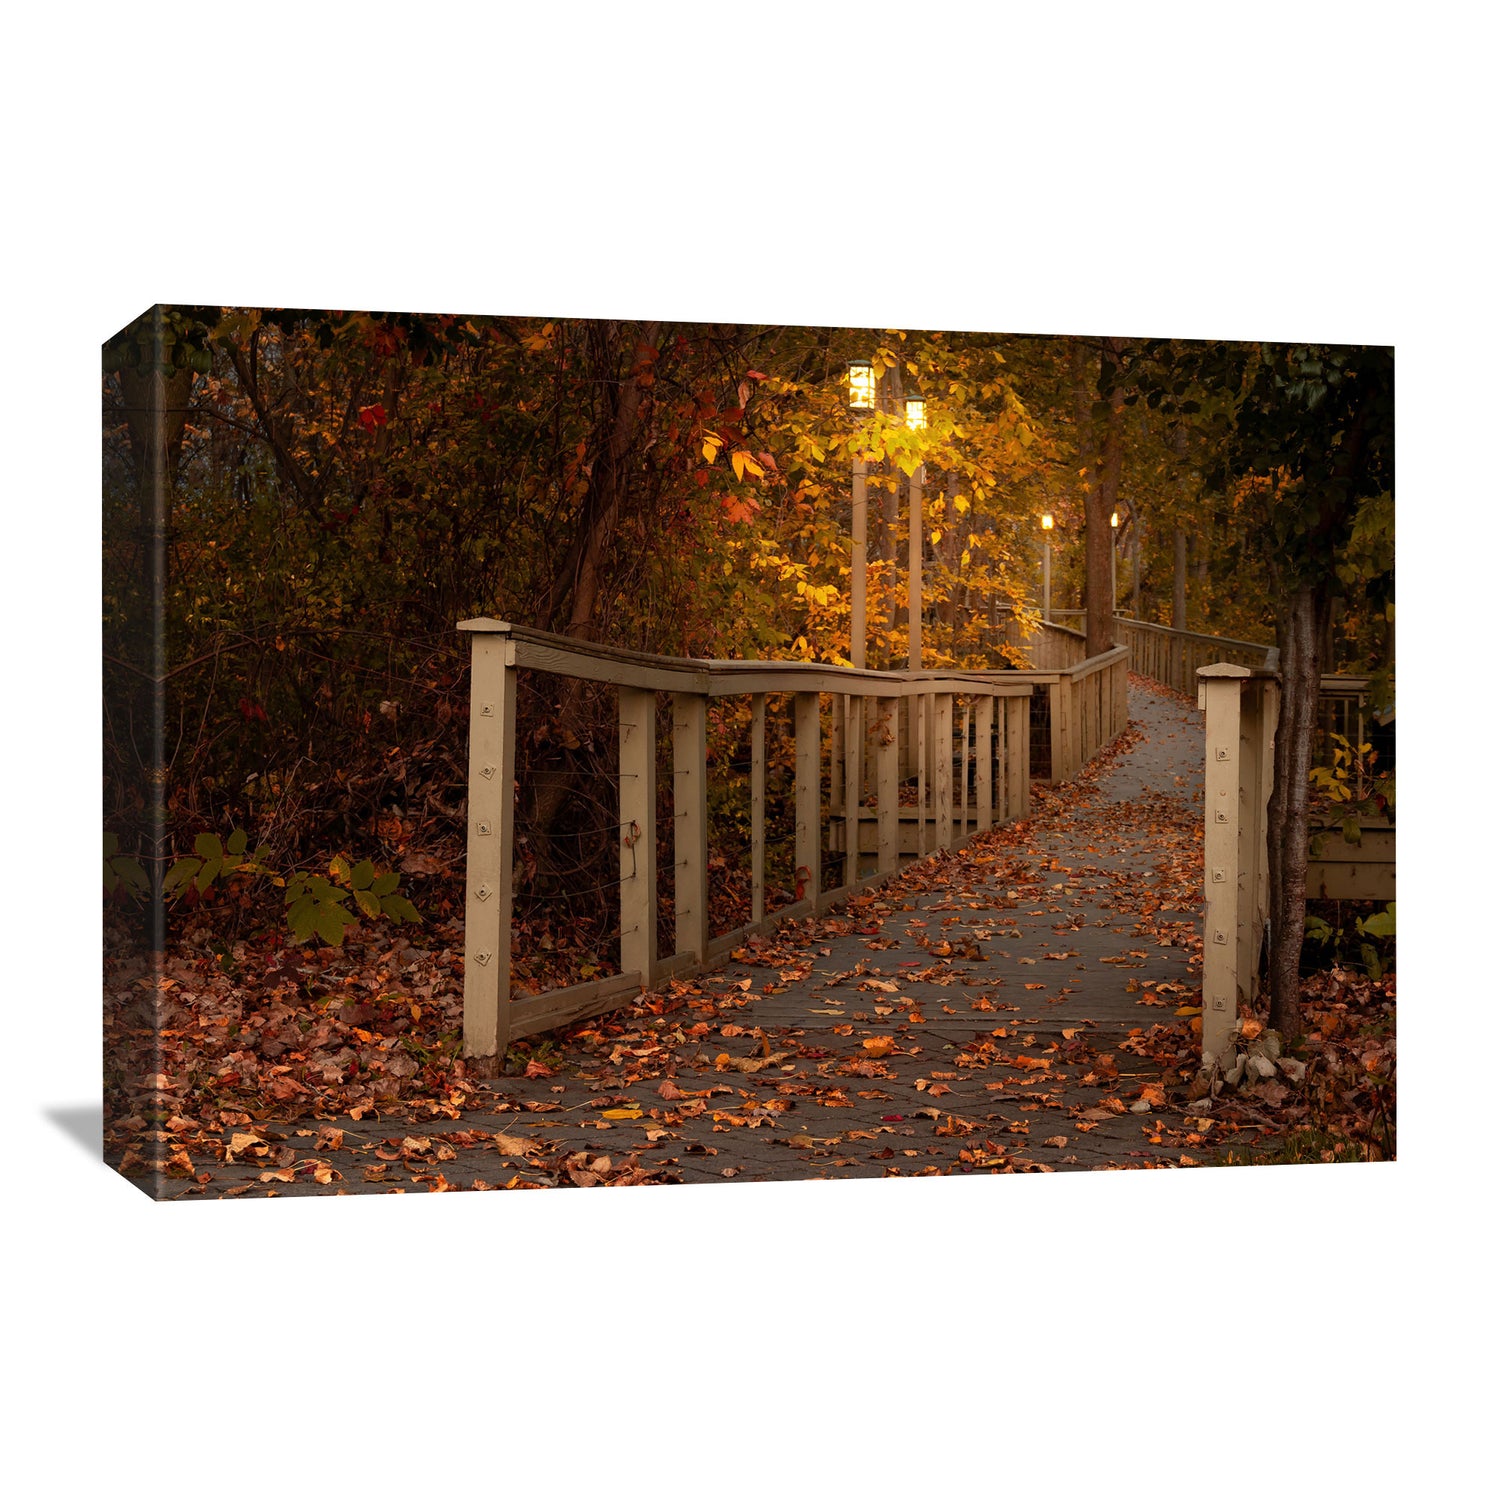 Capturing the peaceful aura of a morning on a boardwalk set against a backdrop of fall colors, the Woodlawn Beach Boardwalk Canvas provides a distinct selection of wall art that enhances autumn-themed decor in your sitting area.